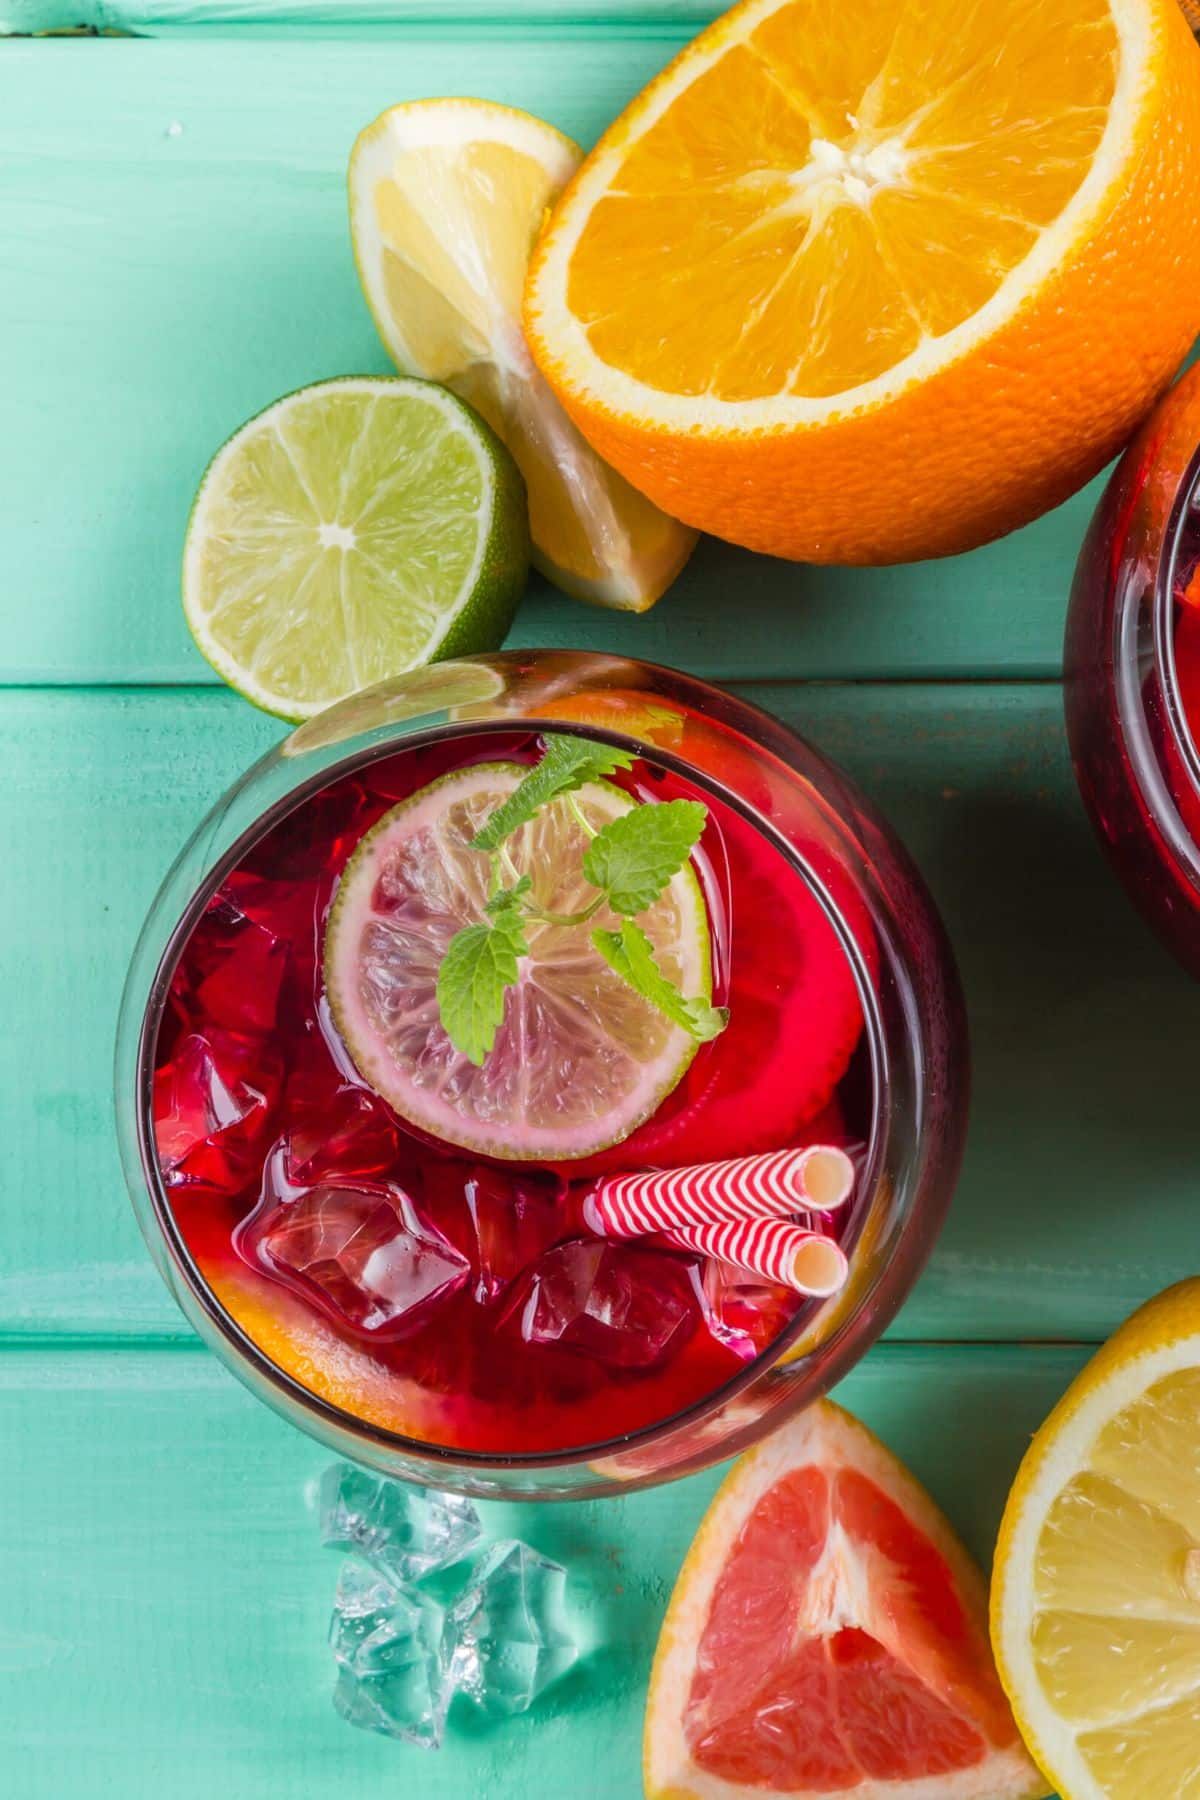 https://www.cleaneatingkitchen.com/wp-content/uploads/2022/07/sangria-mocktail-with-orange-and-lime.jpg